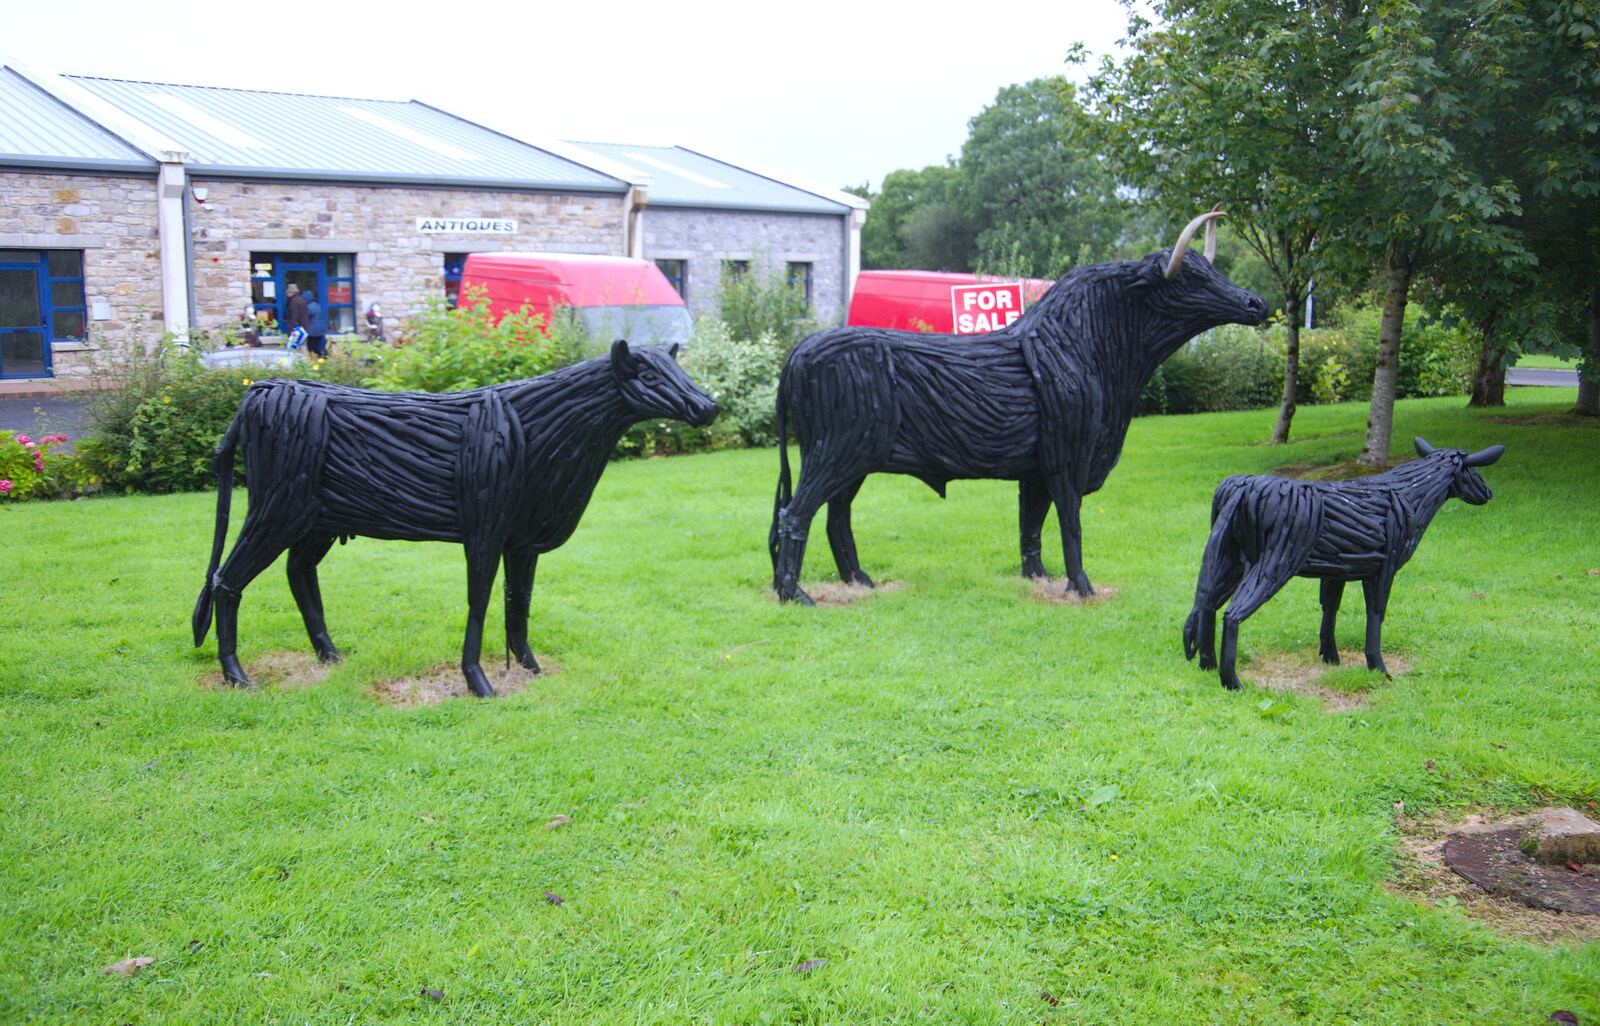 Amusing cow sculptures for sale from Travels in the Borderlands: An Blaic/Blacklion to Belcoo and back, Cavan and Fermanagh, Ireland - 22nd August 2019